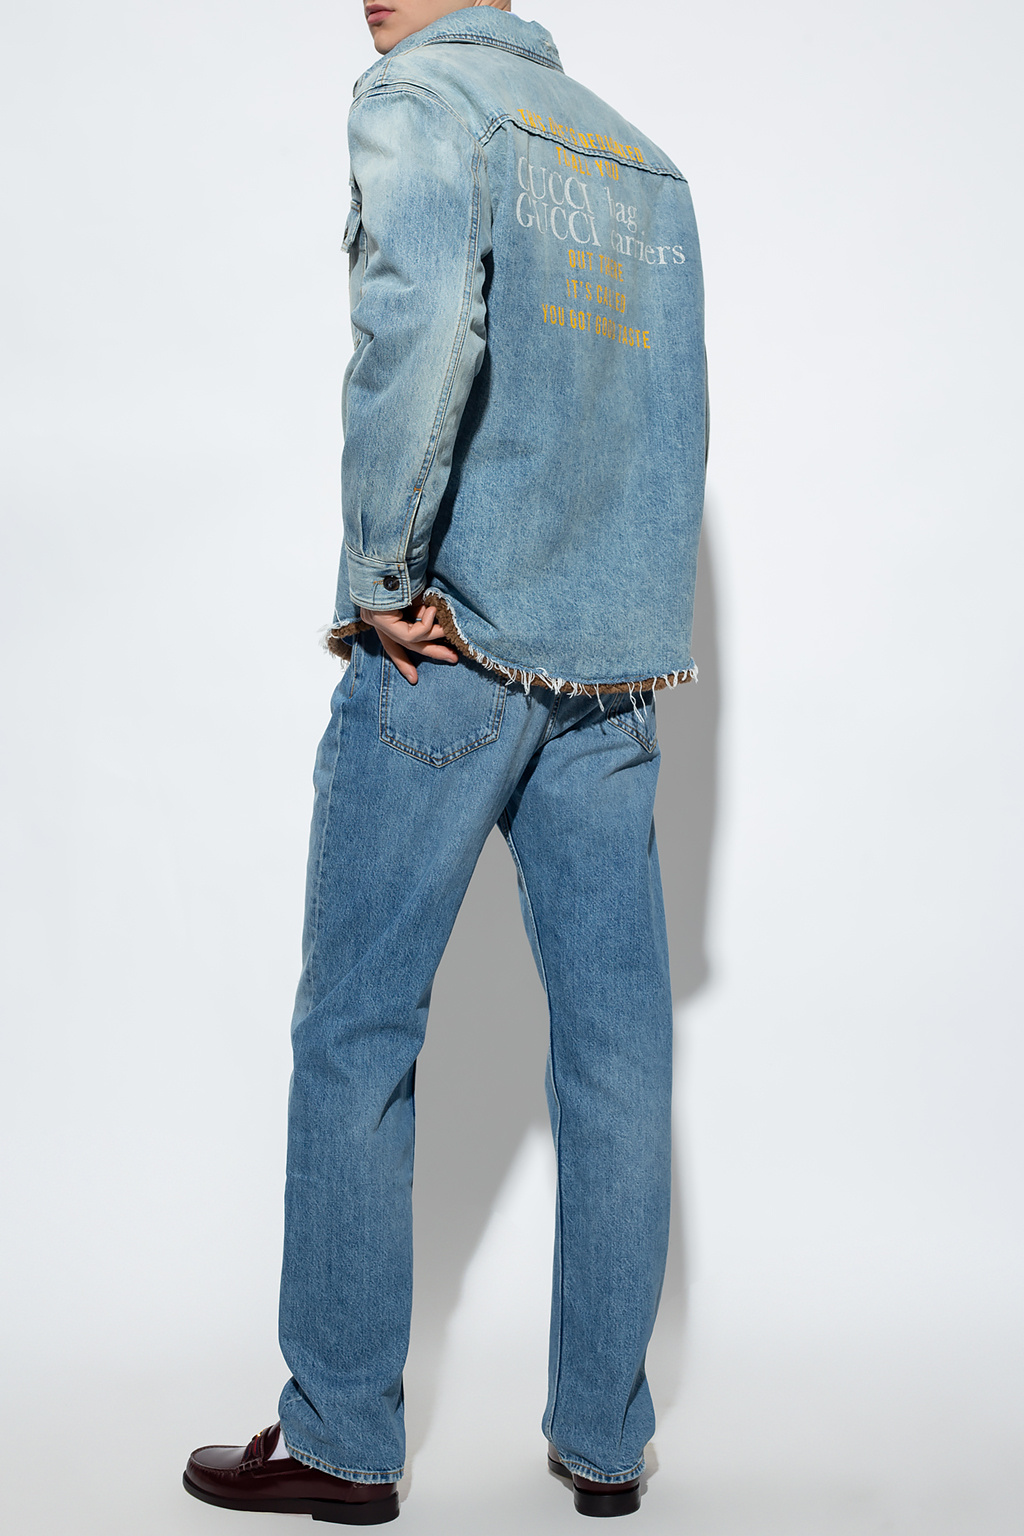 gucci boots Insulated denim jacket